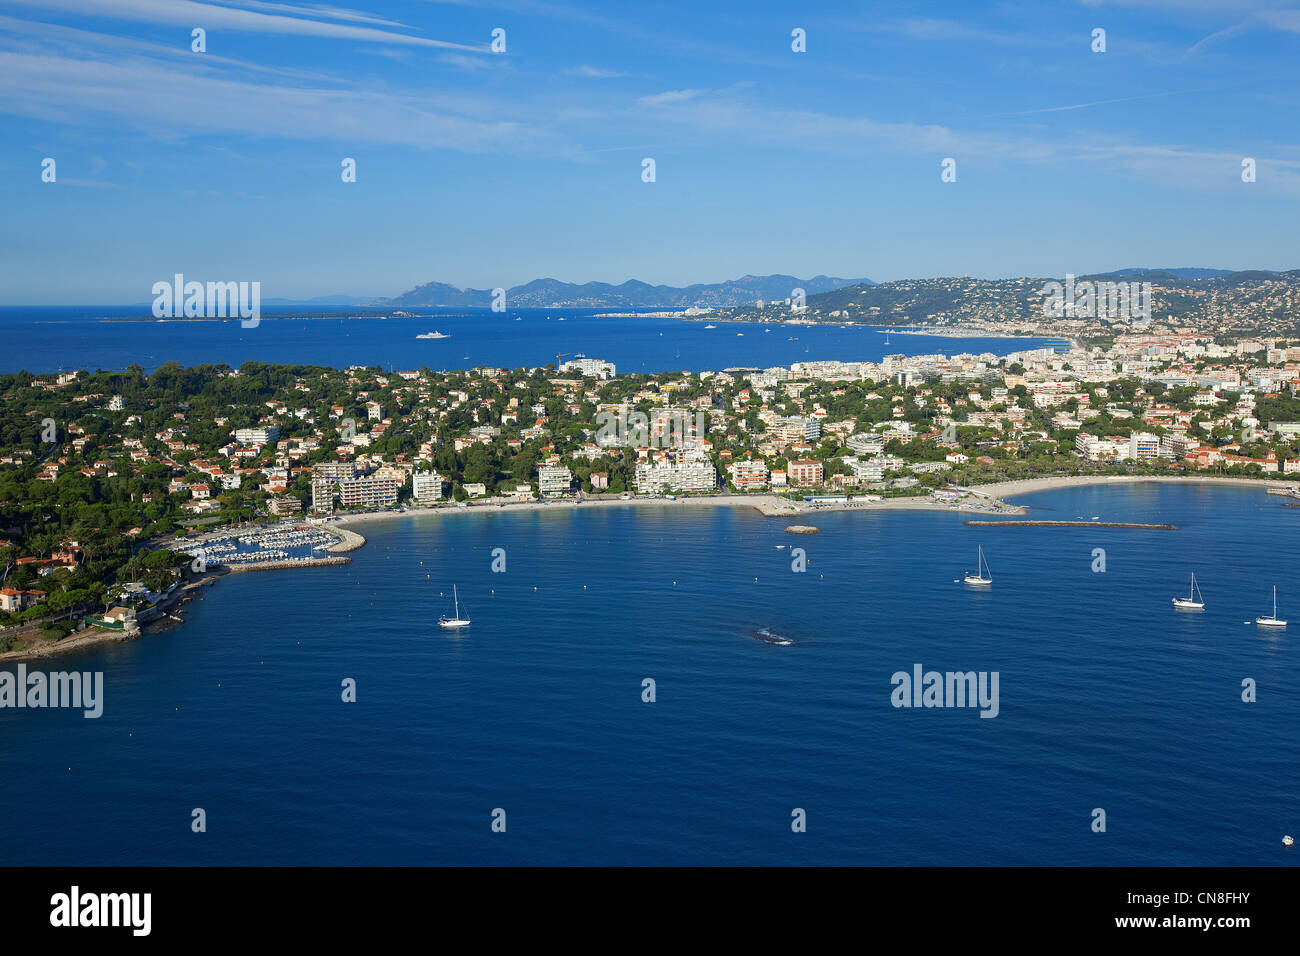 France, Alpes Maritimes, Antibes, Cap d'Antibes, Juan les Pins in the background (aerial view) Stock Photo